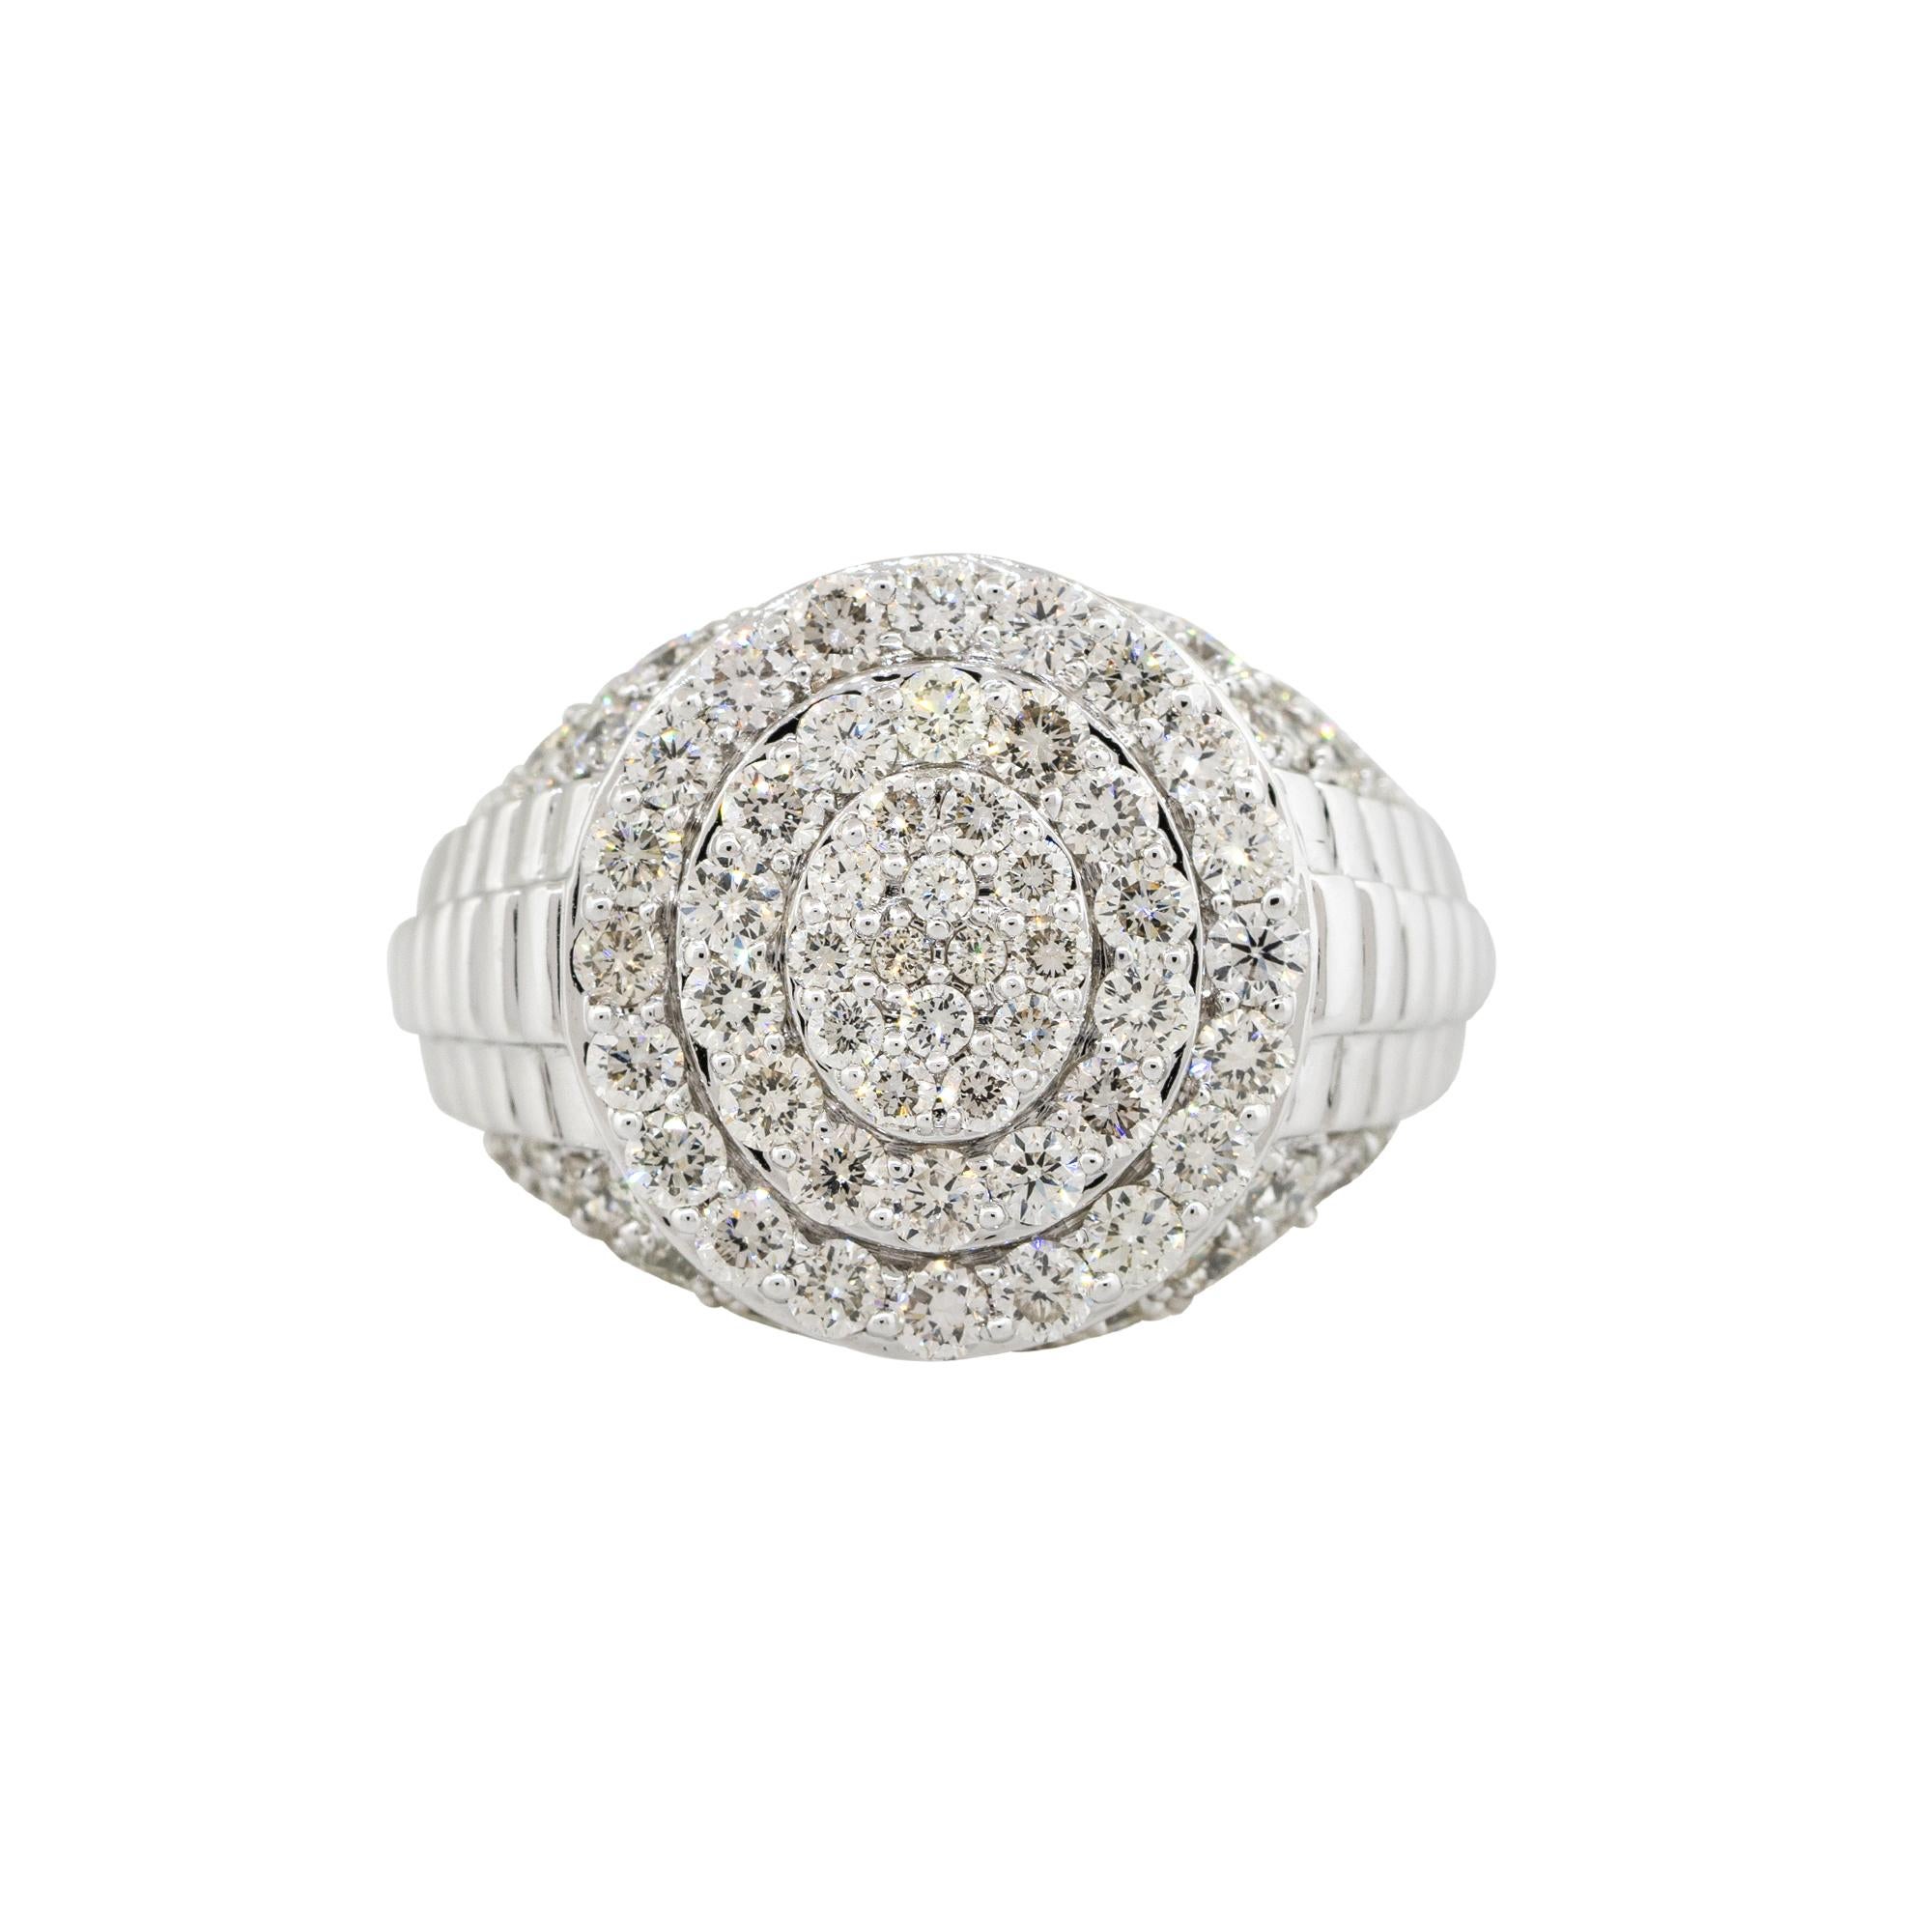 Material: 14k white gold
Diamond Details: Approx. 4.65ctw of round cut Diamonds. Diamonds are G/H in color and VS in clarity
Size: 10.25 
Measurements: 27 x 19 x 30mm
Weight: 12.7g (8.1dwt)
Additional Details: This item comes with a presentation